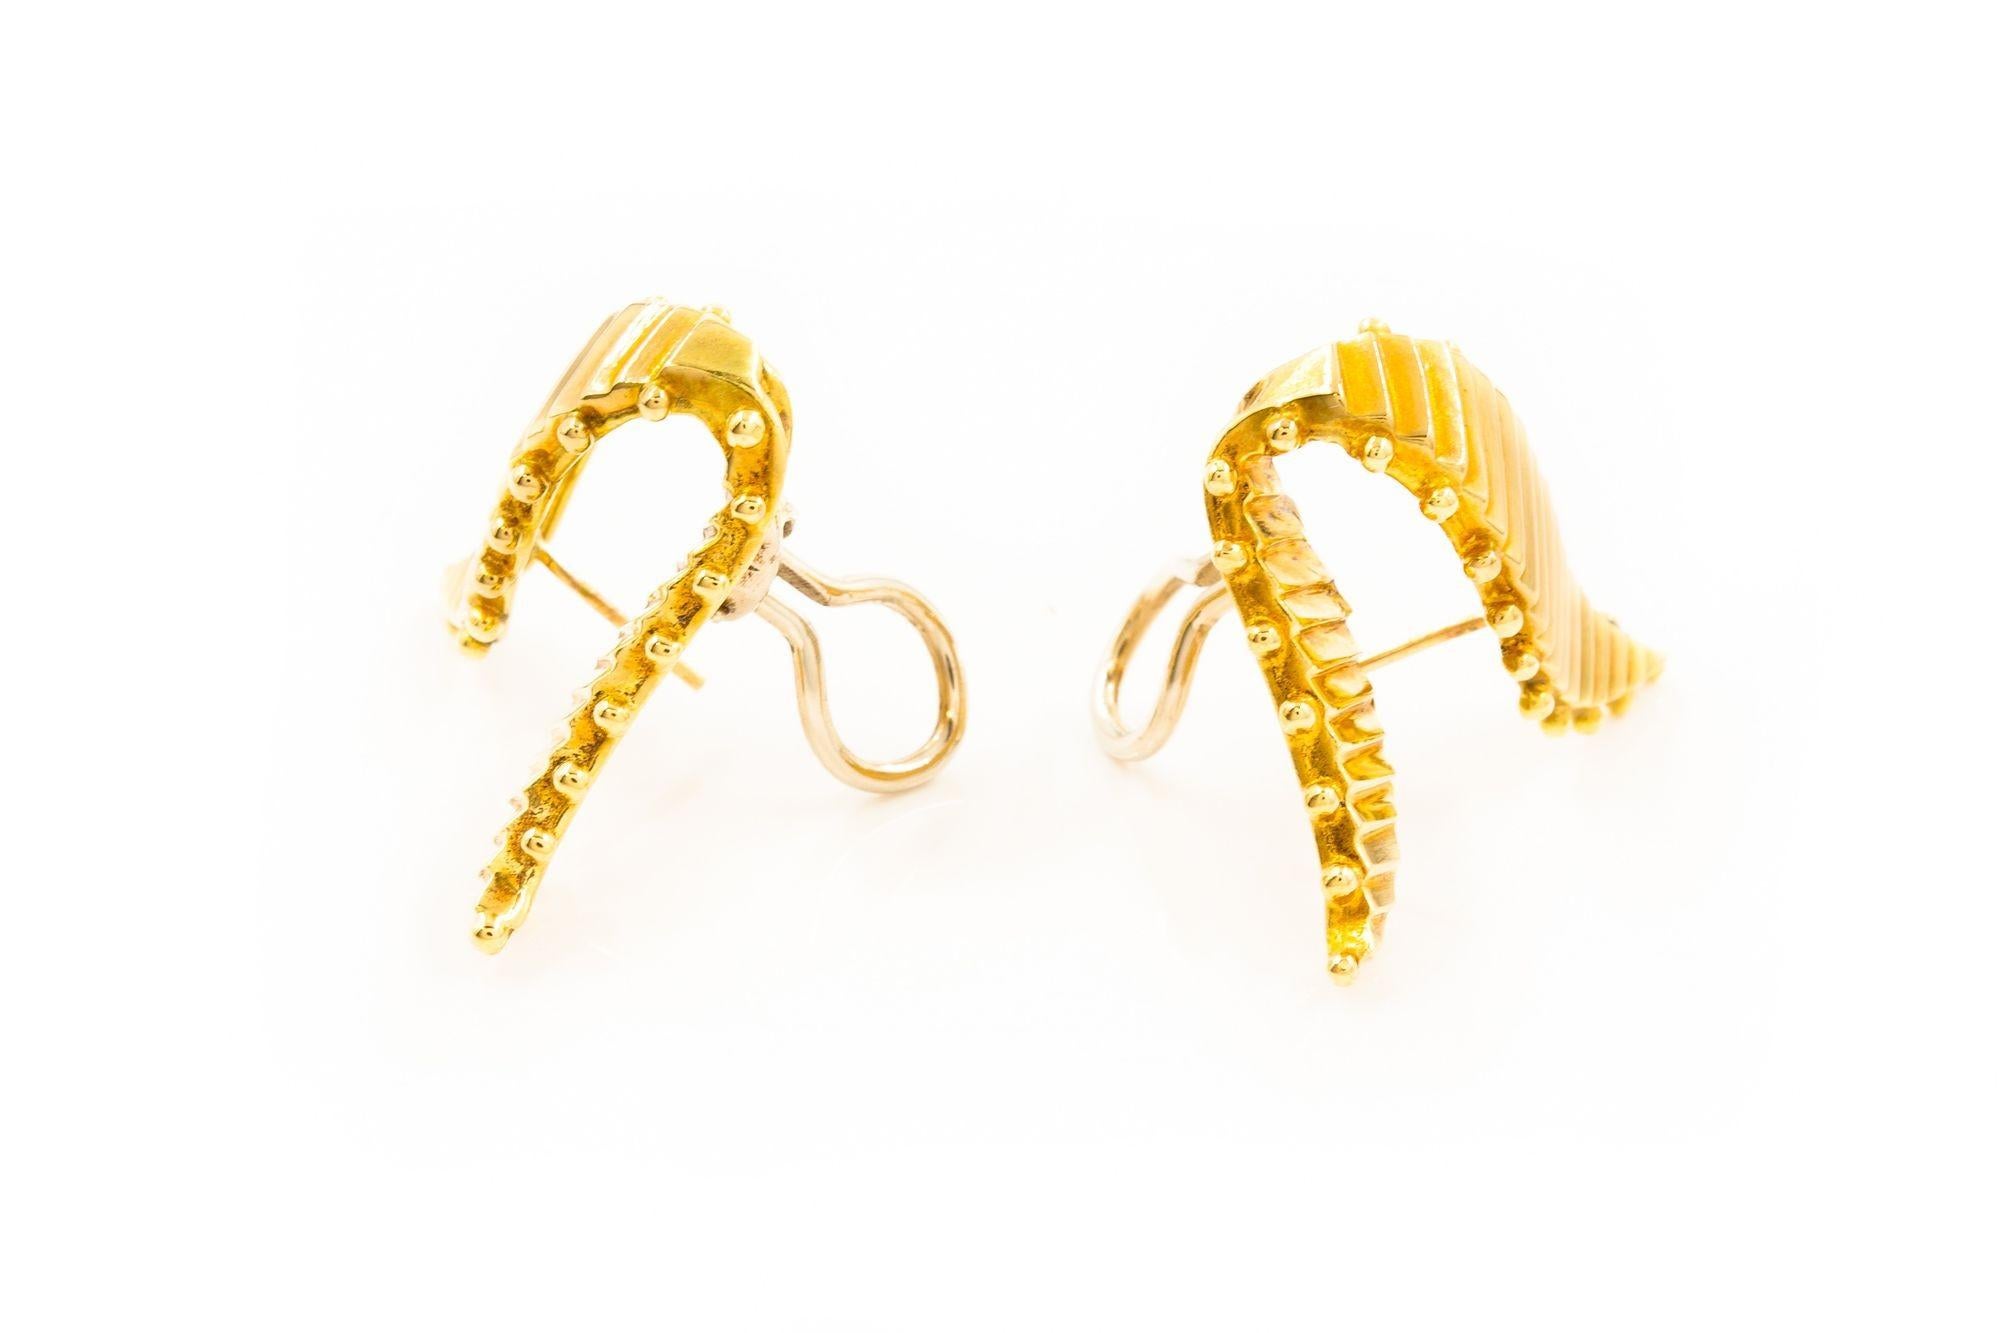 Pair of 18K Yellow Gold “V” Earrings In Good Condition For Sale In Shippensburg, PA